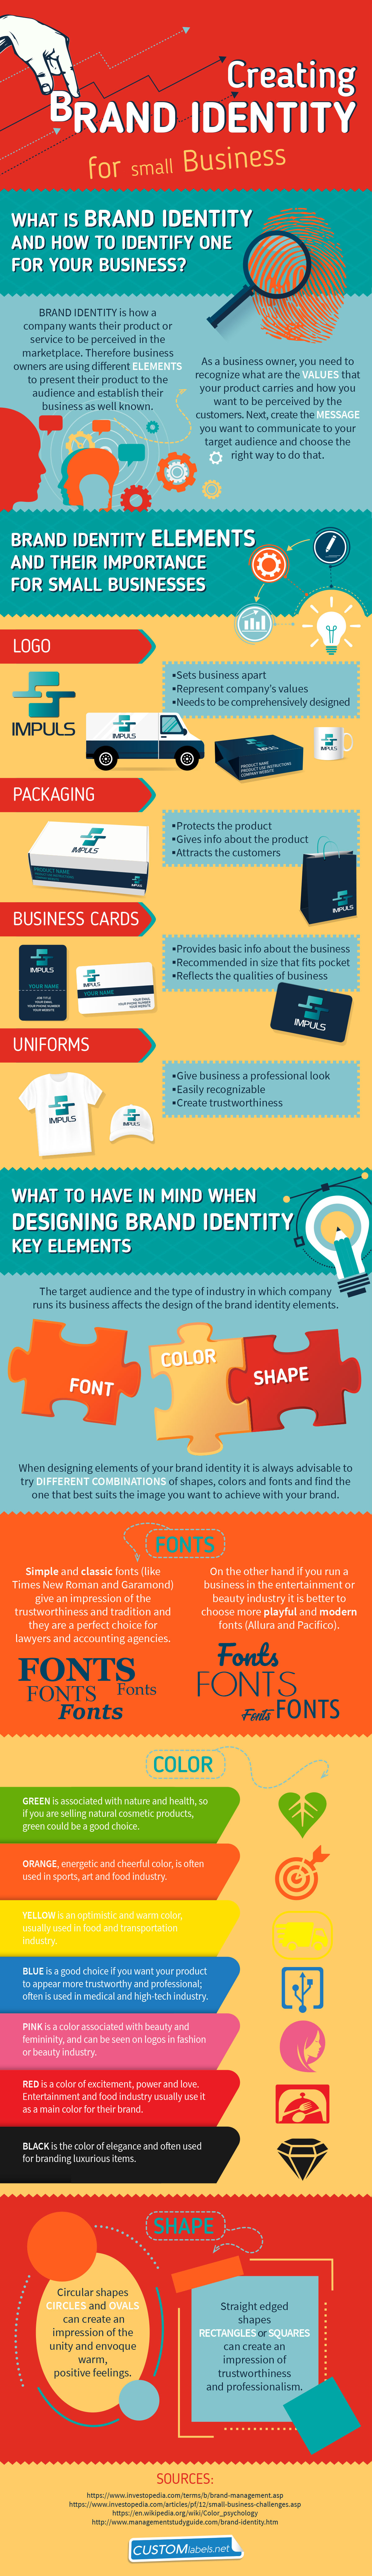 How To Create A Small Business Brand Identity